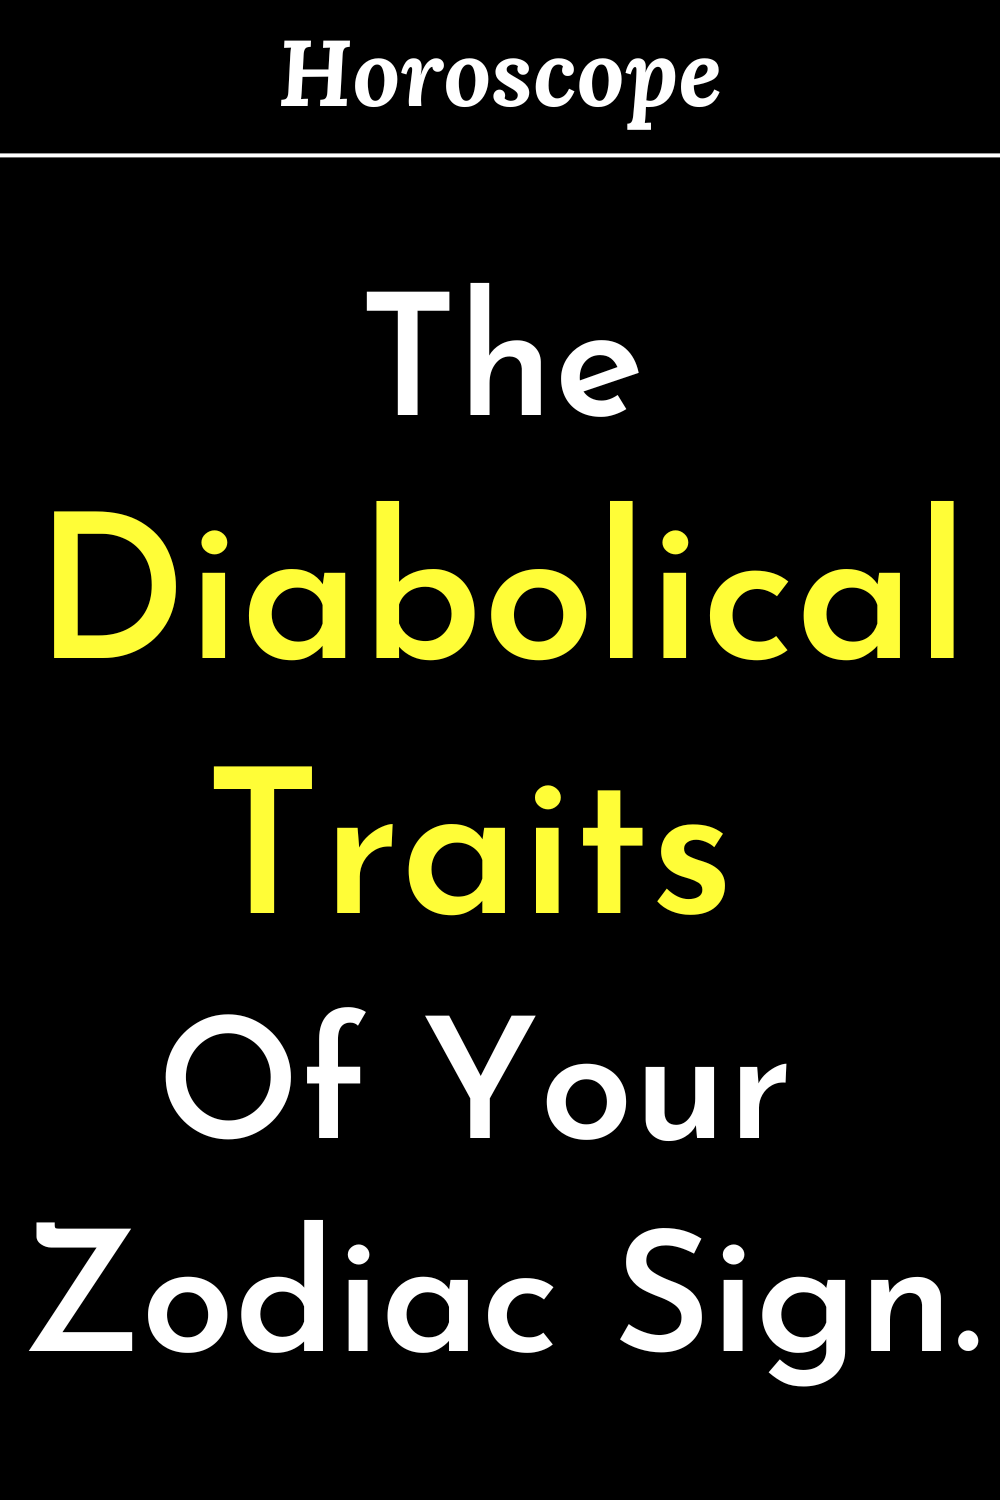 The Diabolical Traits Of Your Zodiac Sign.